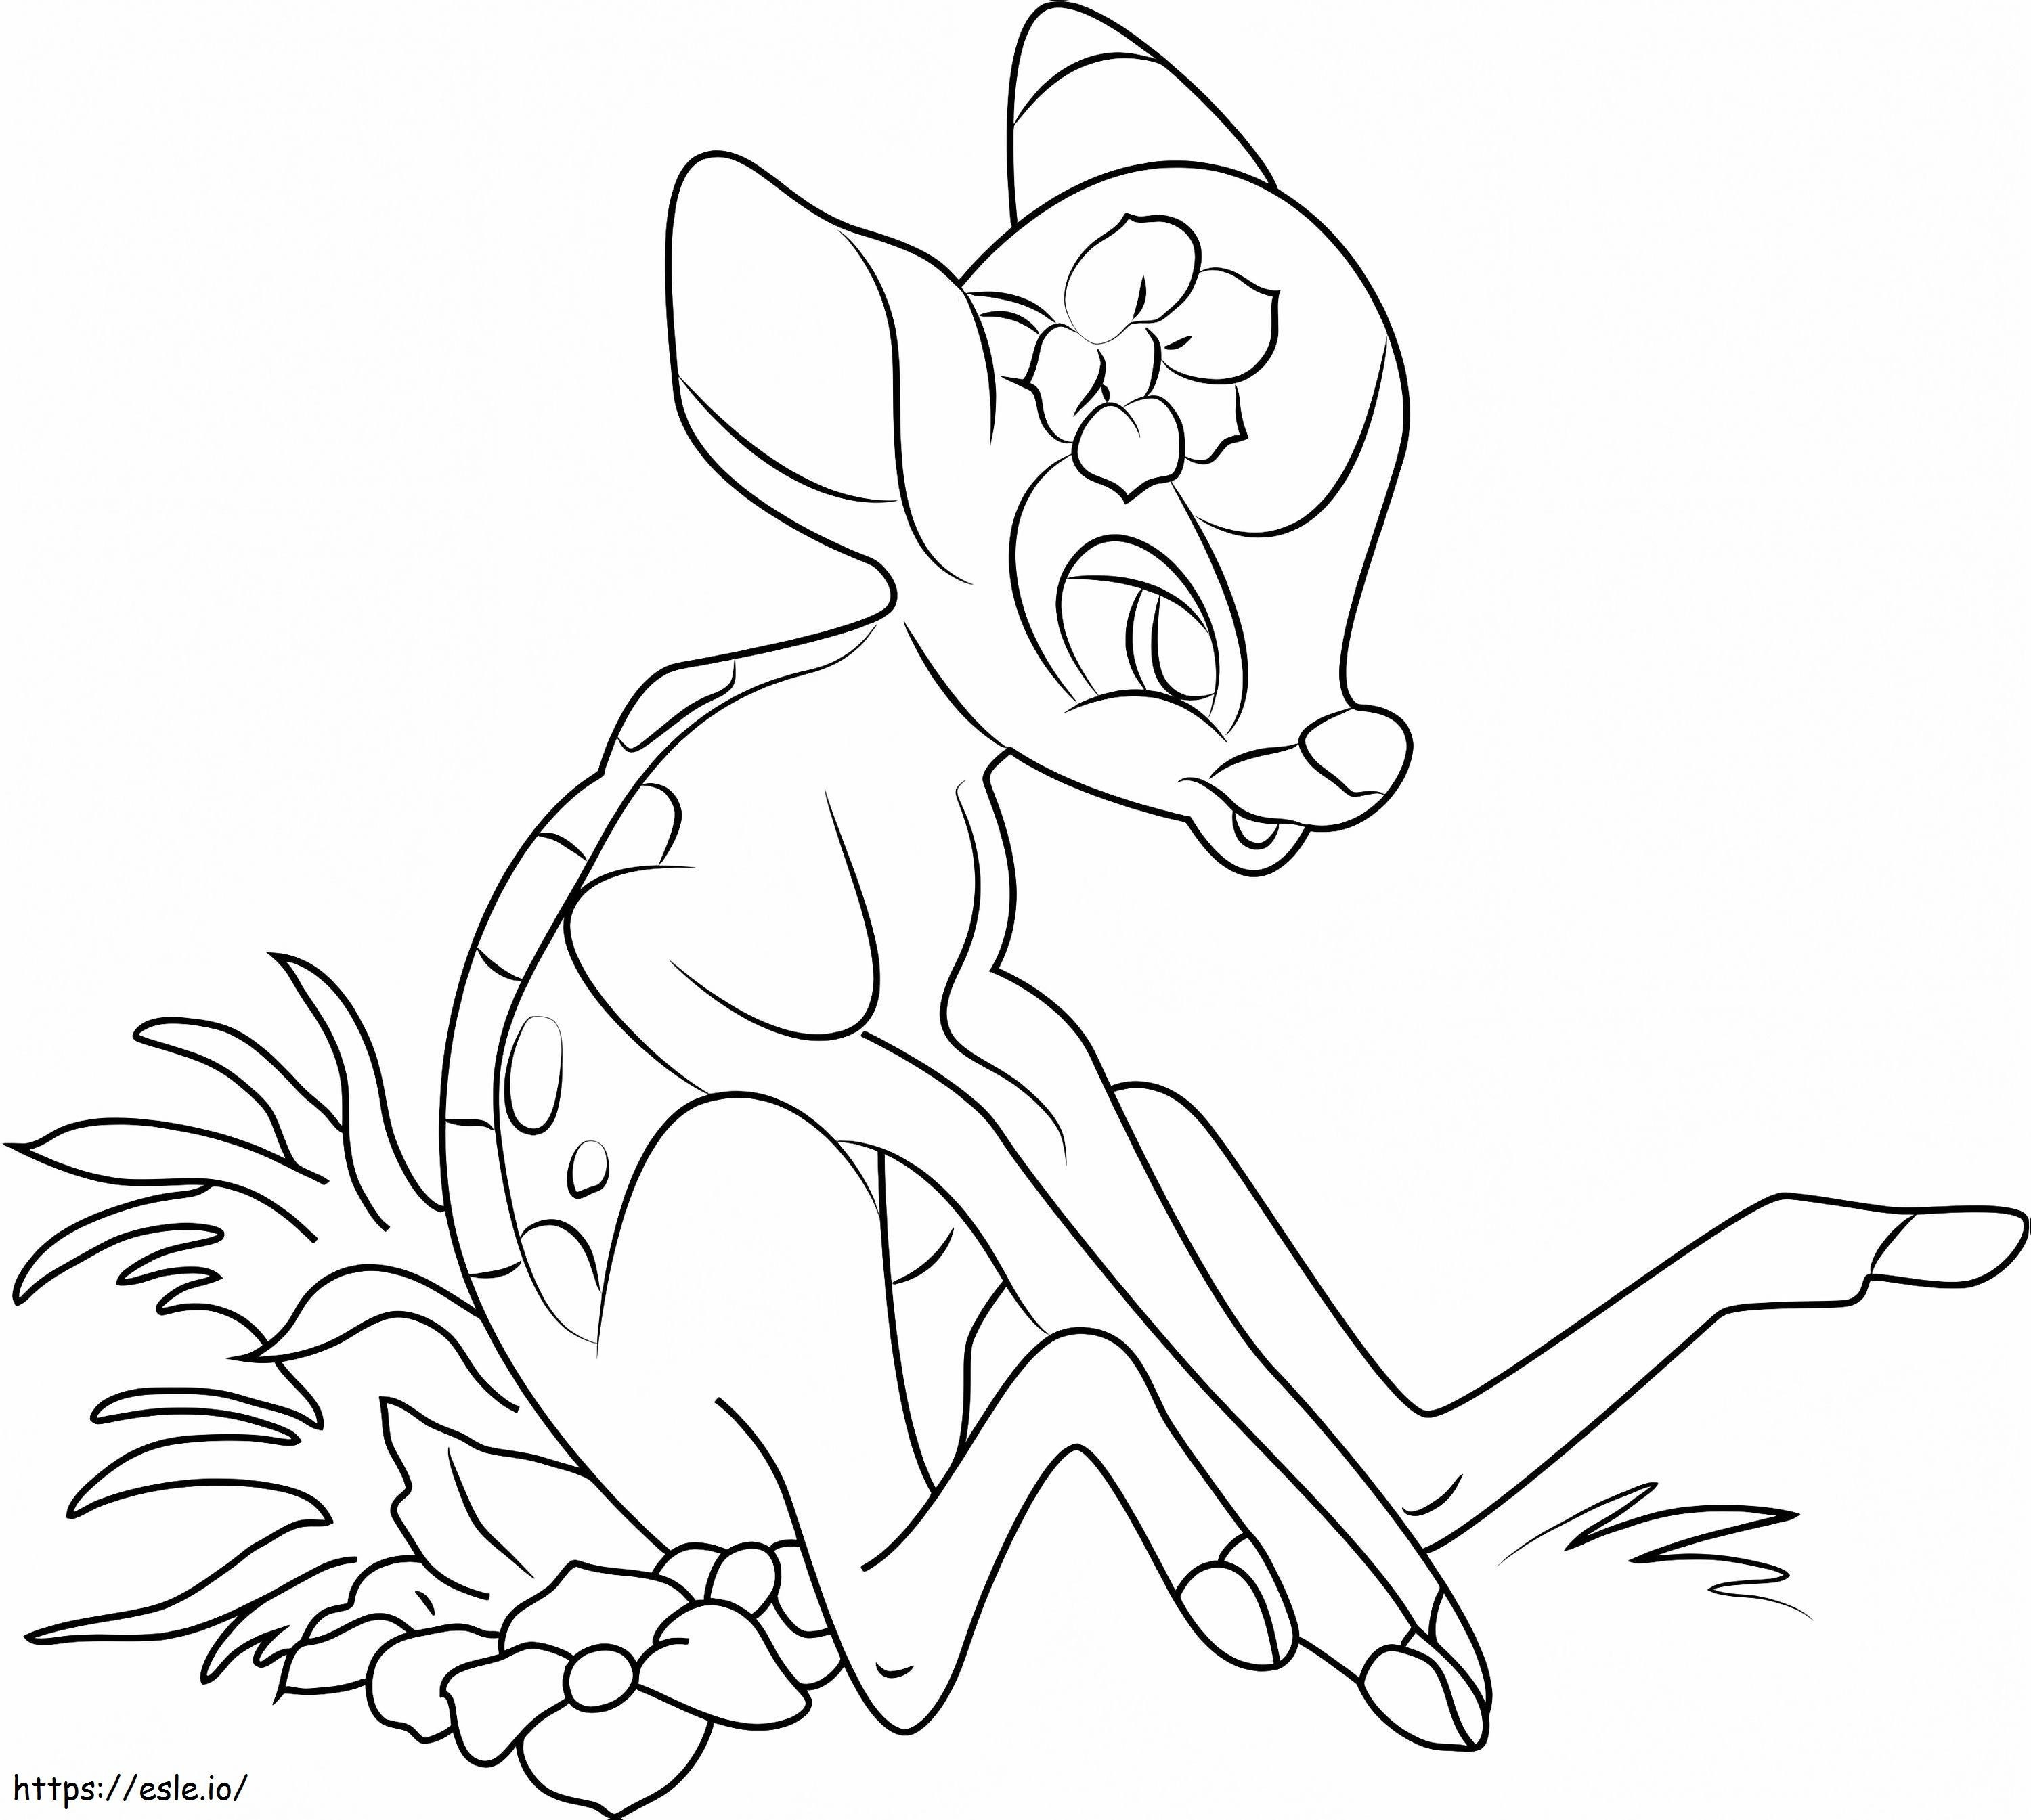 Happy Bambi coloring page